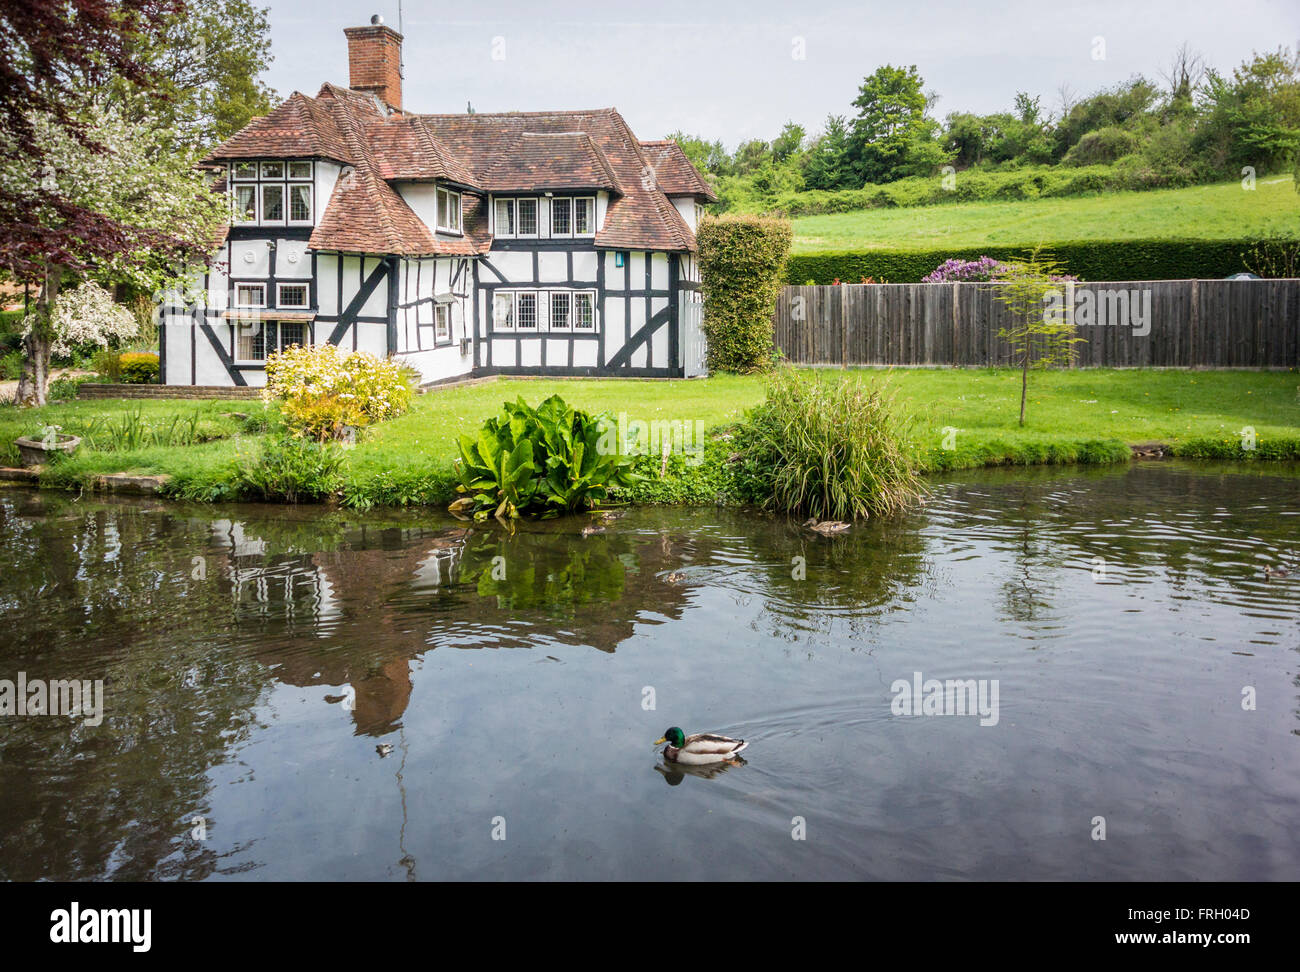 Pretty half timbered cottage in the village of Loose, Kent, UK with the Loose river in the foreground Stock Photo